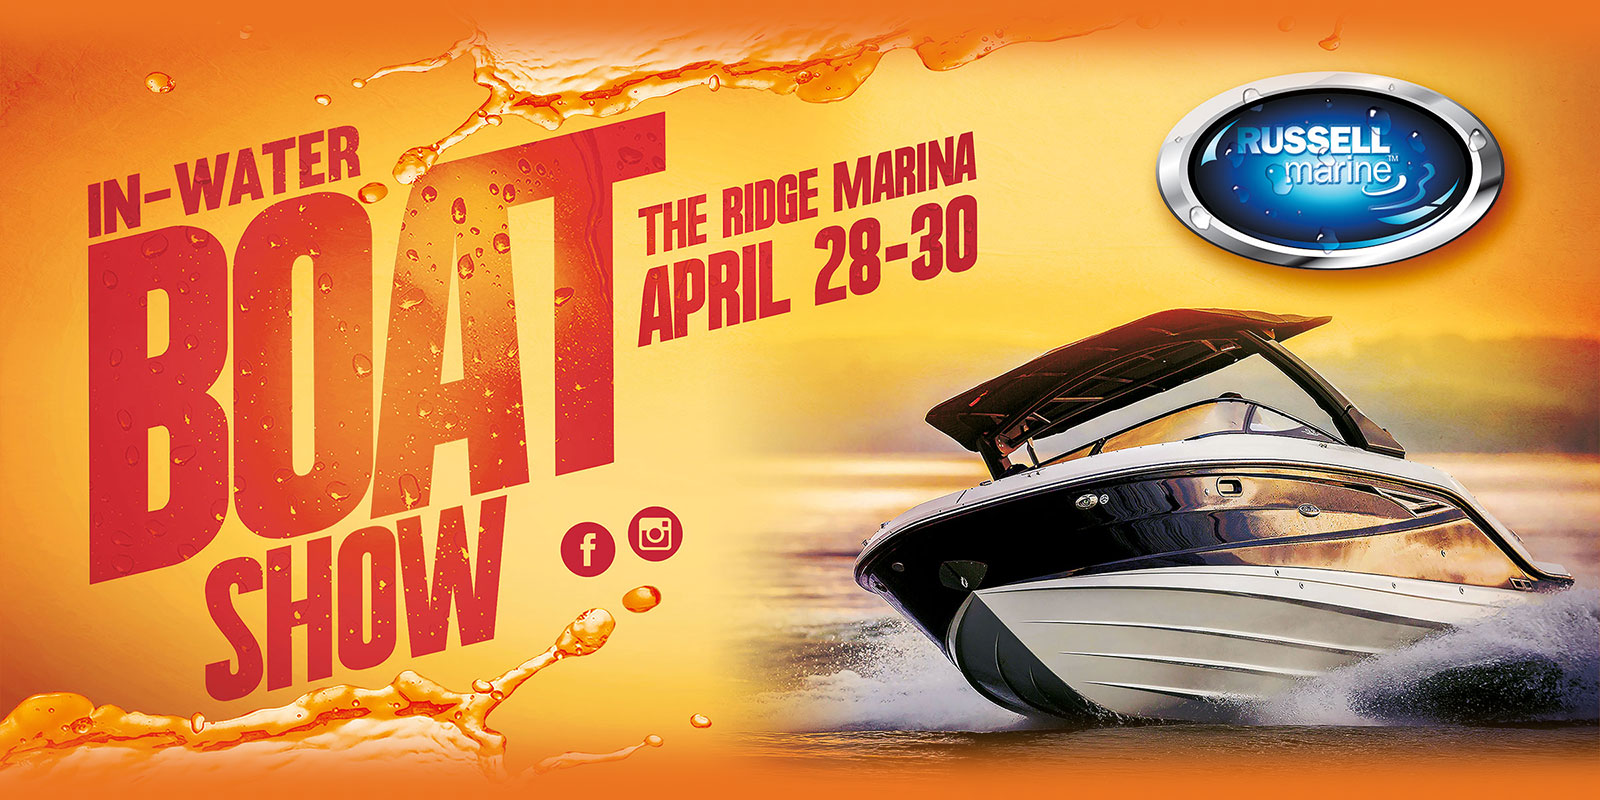 Russell Marine's InWater Boat Show is Back! Lake Martin Realty